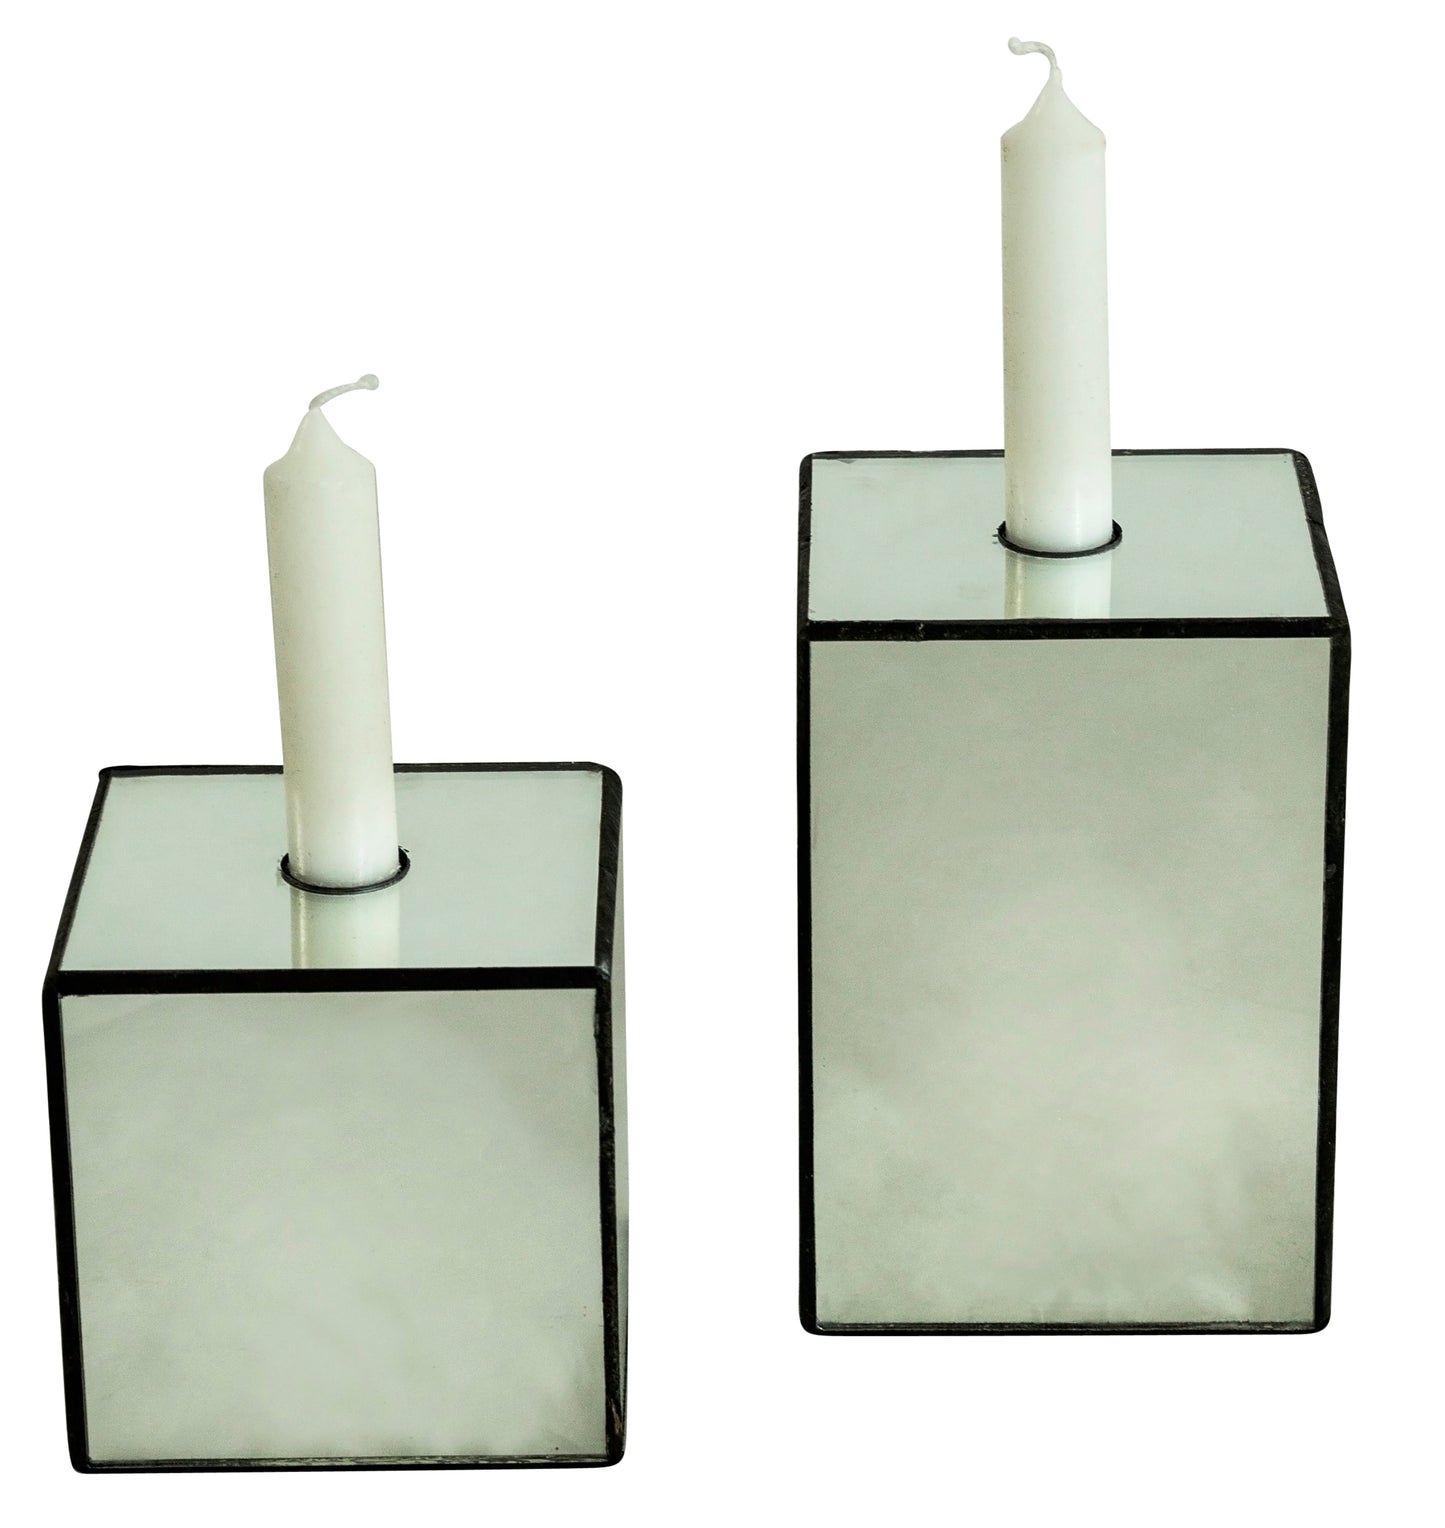 Antiqued Mirror Cube Candle Holder - Low